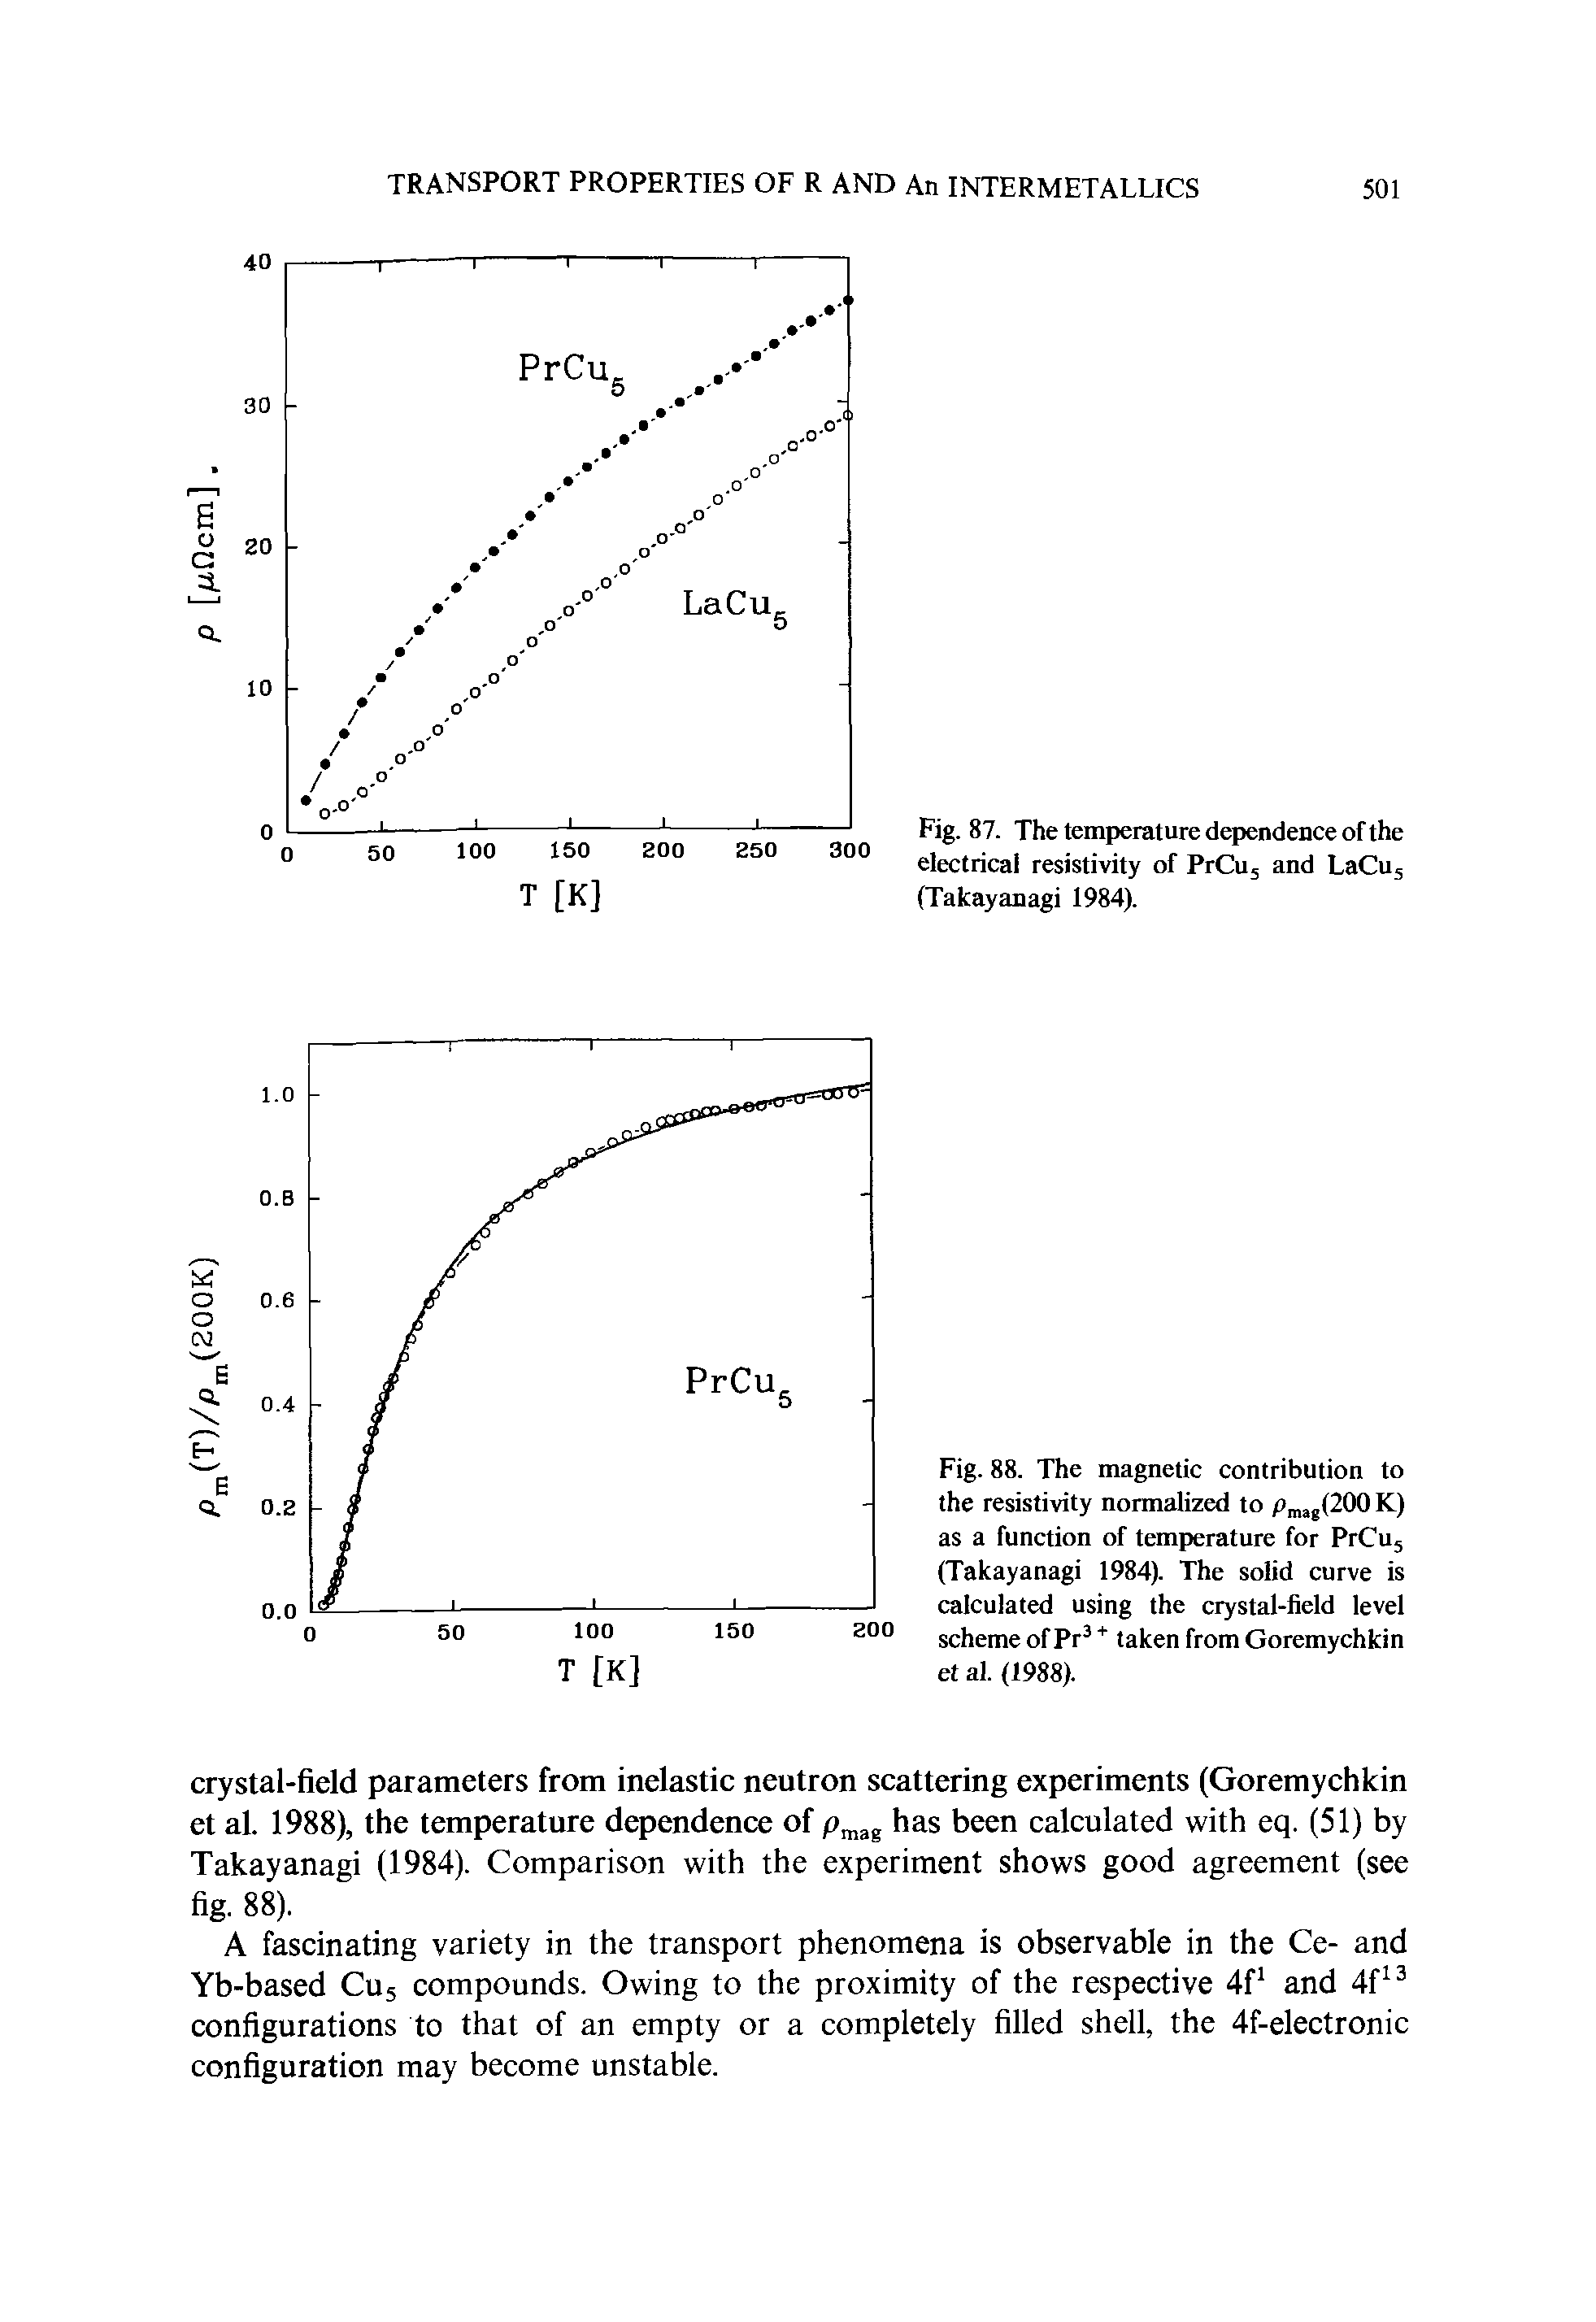 Fig. 88. The magnetic contribution to the resistivity normalized to p ,(200 K) as a function of temperature for PrCu, (Takayanagi 1984). The solid curve is calculated using the crystal-field level scheme of Pr taken from Goremychkin et al. (1988).